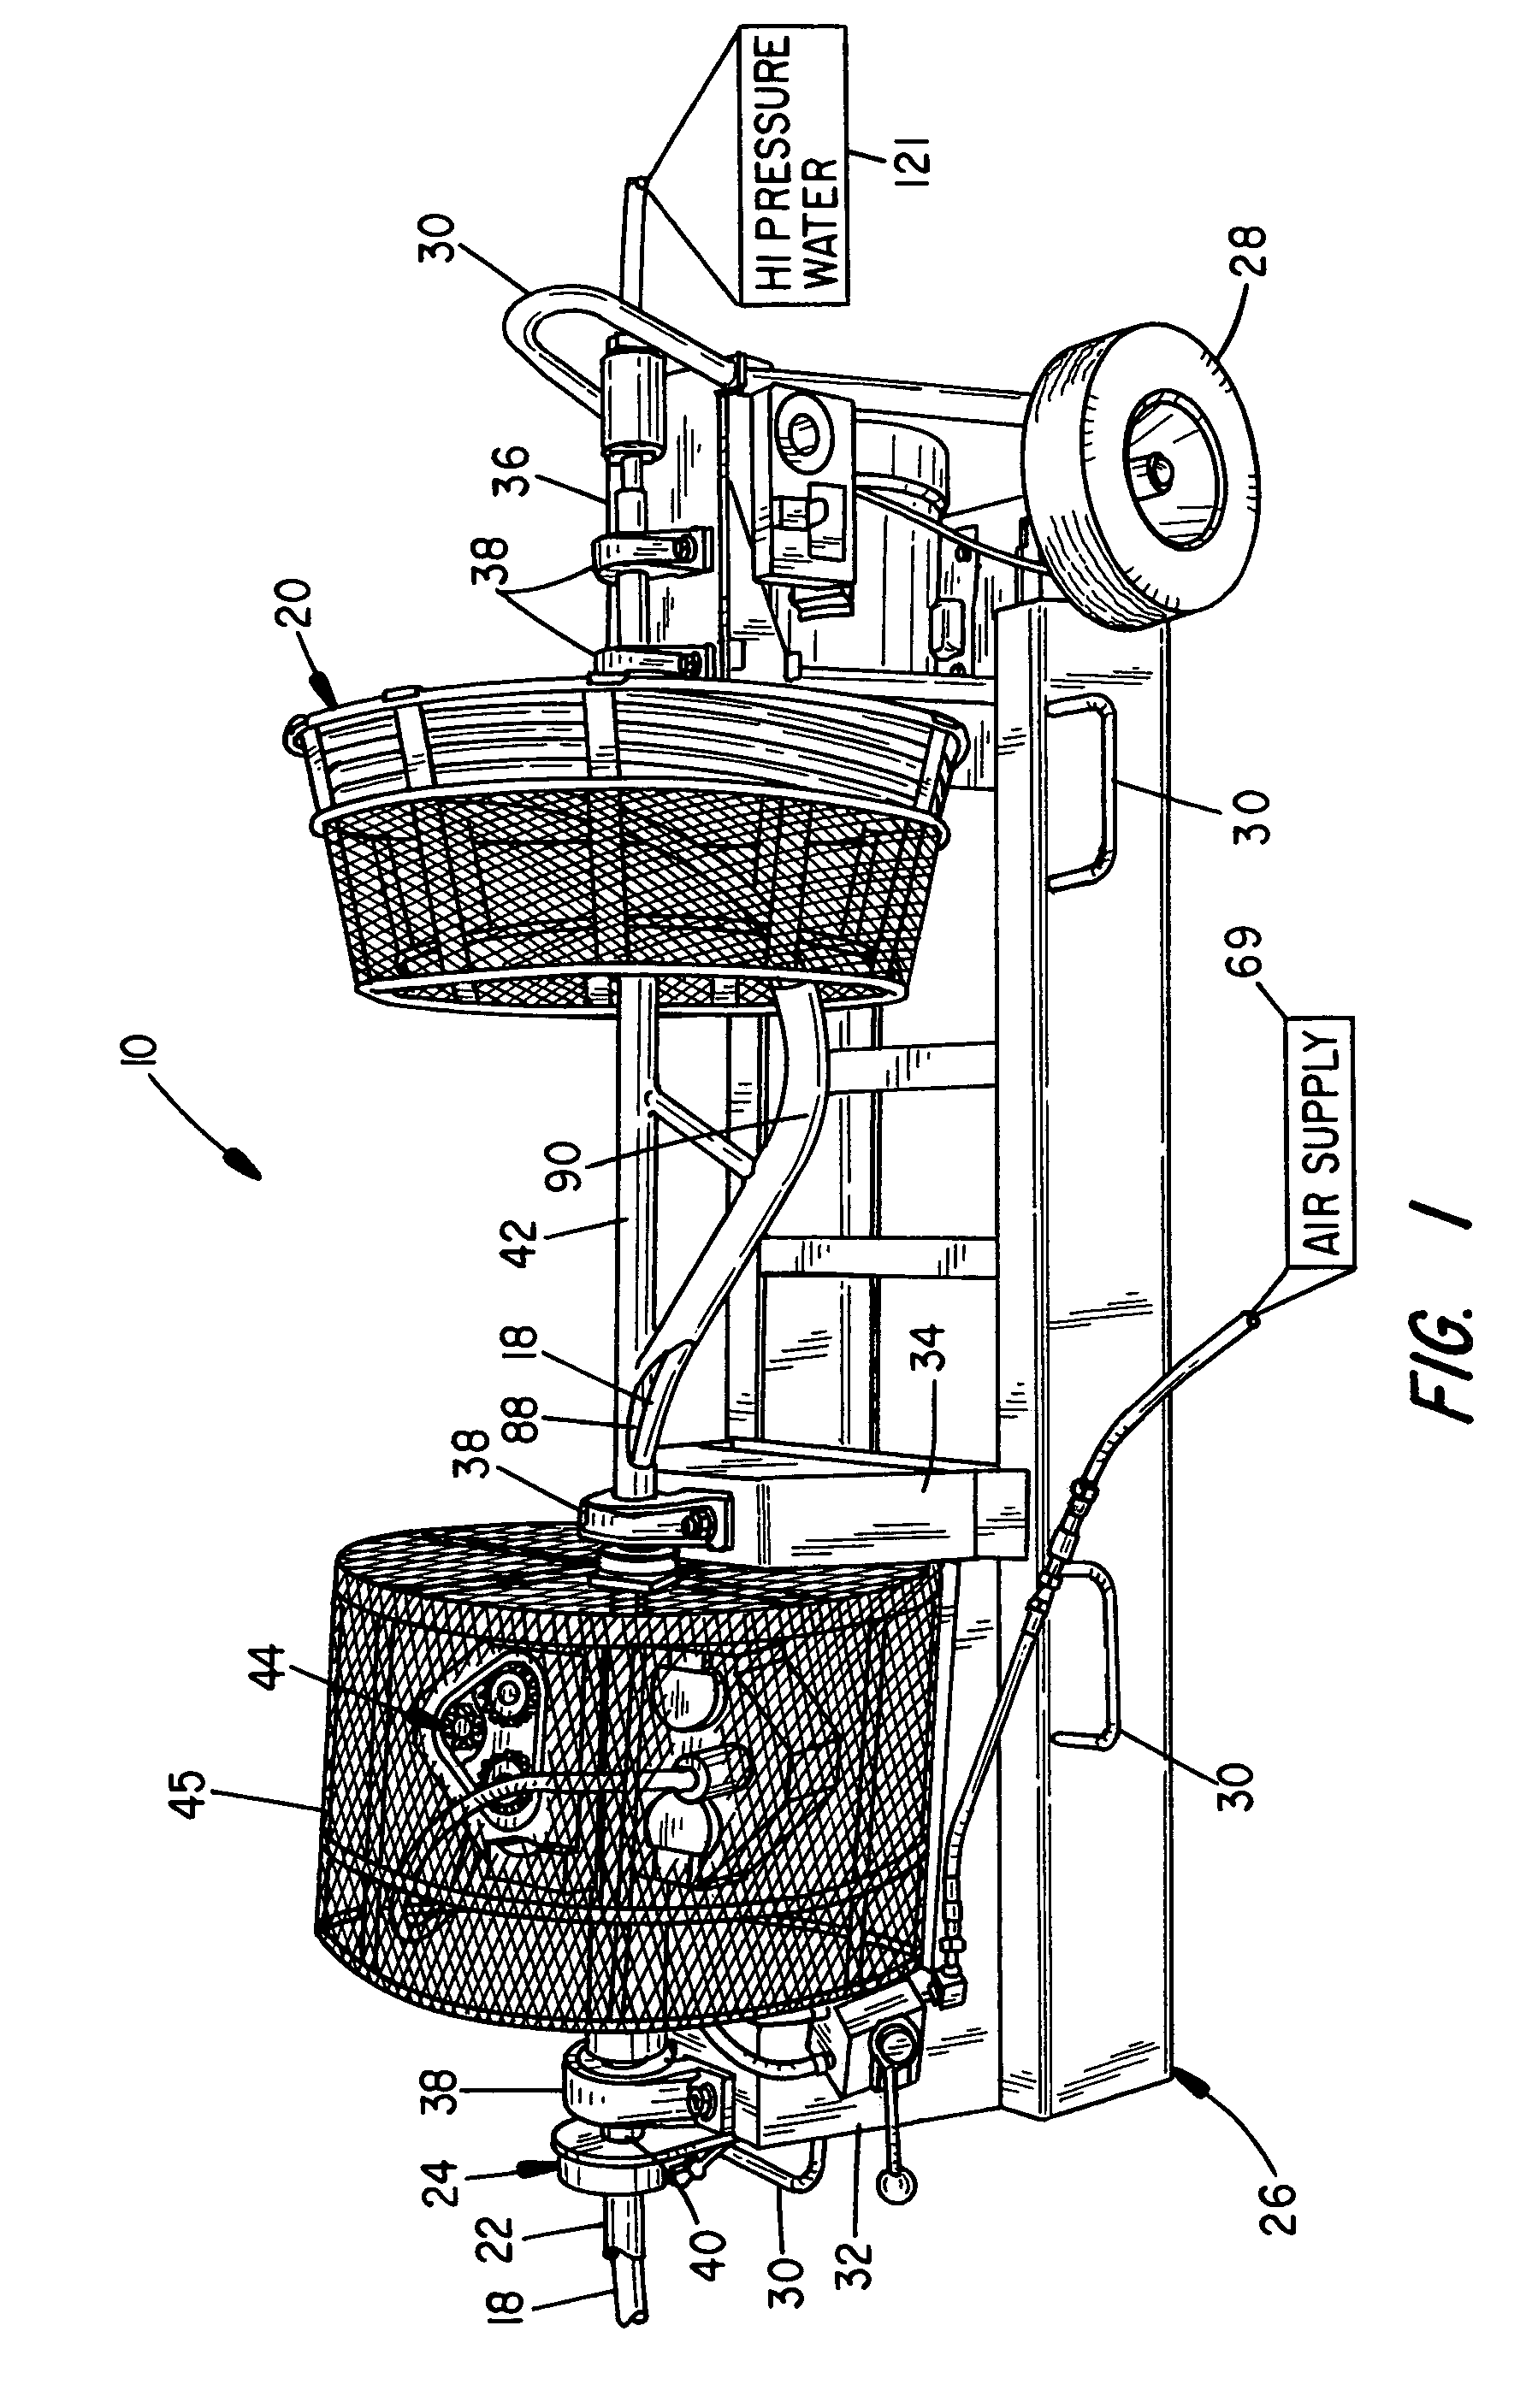 High pressure tube cleaning apparatus